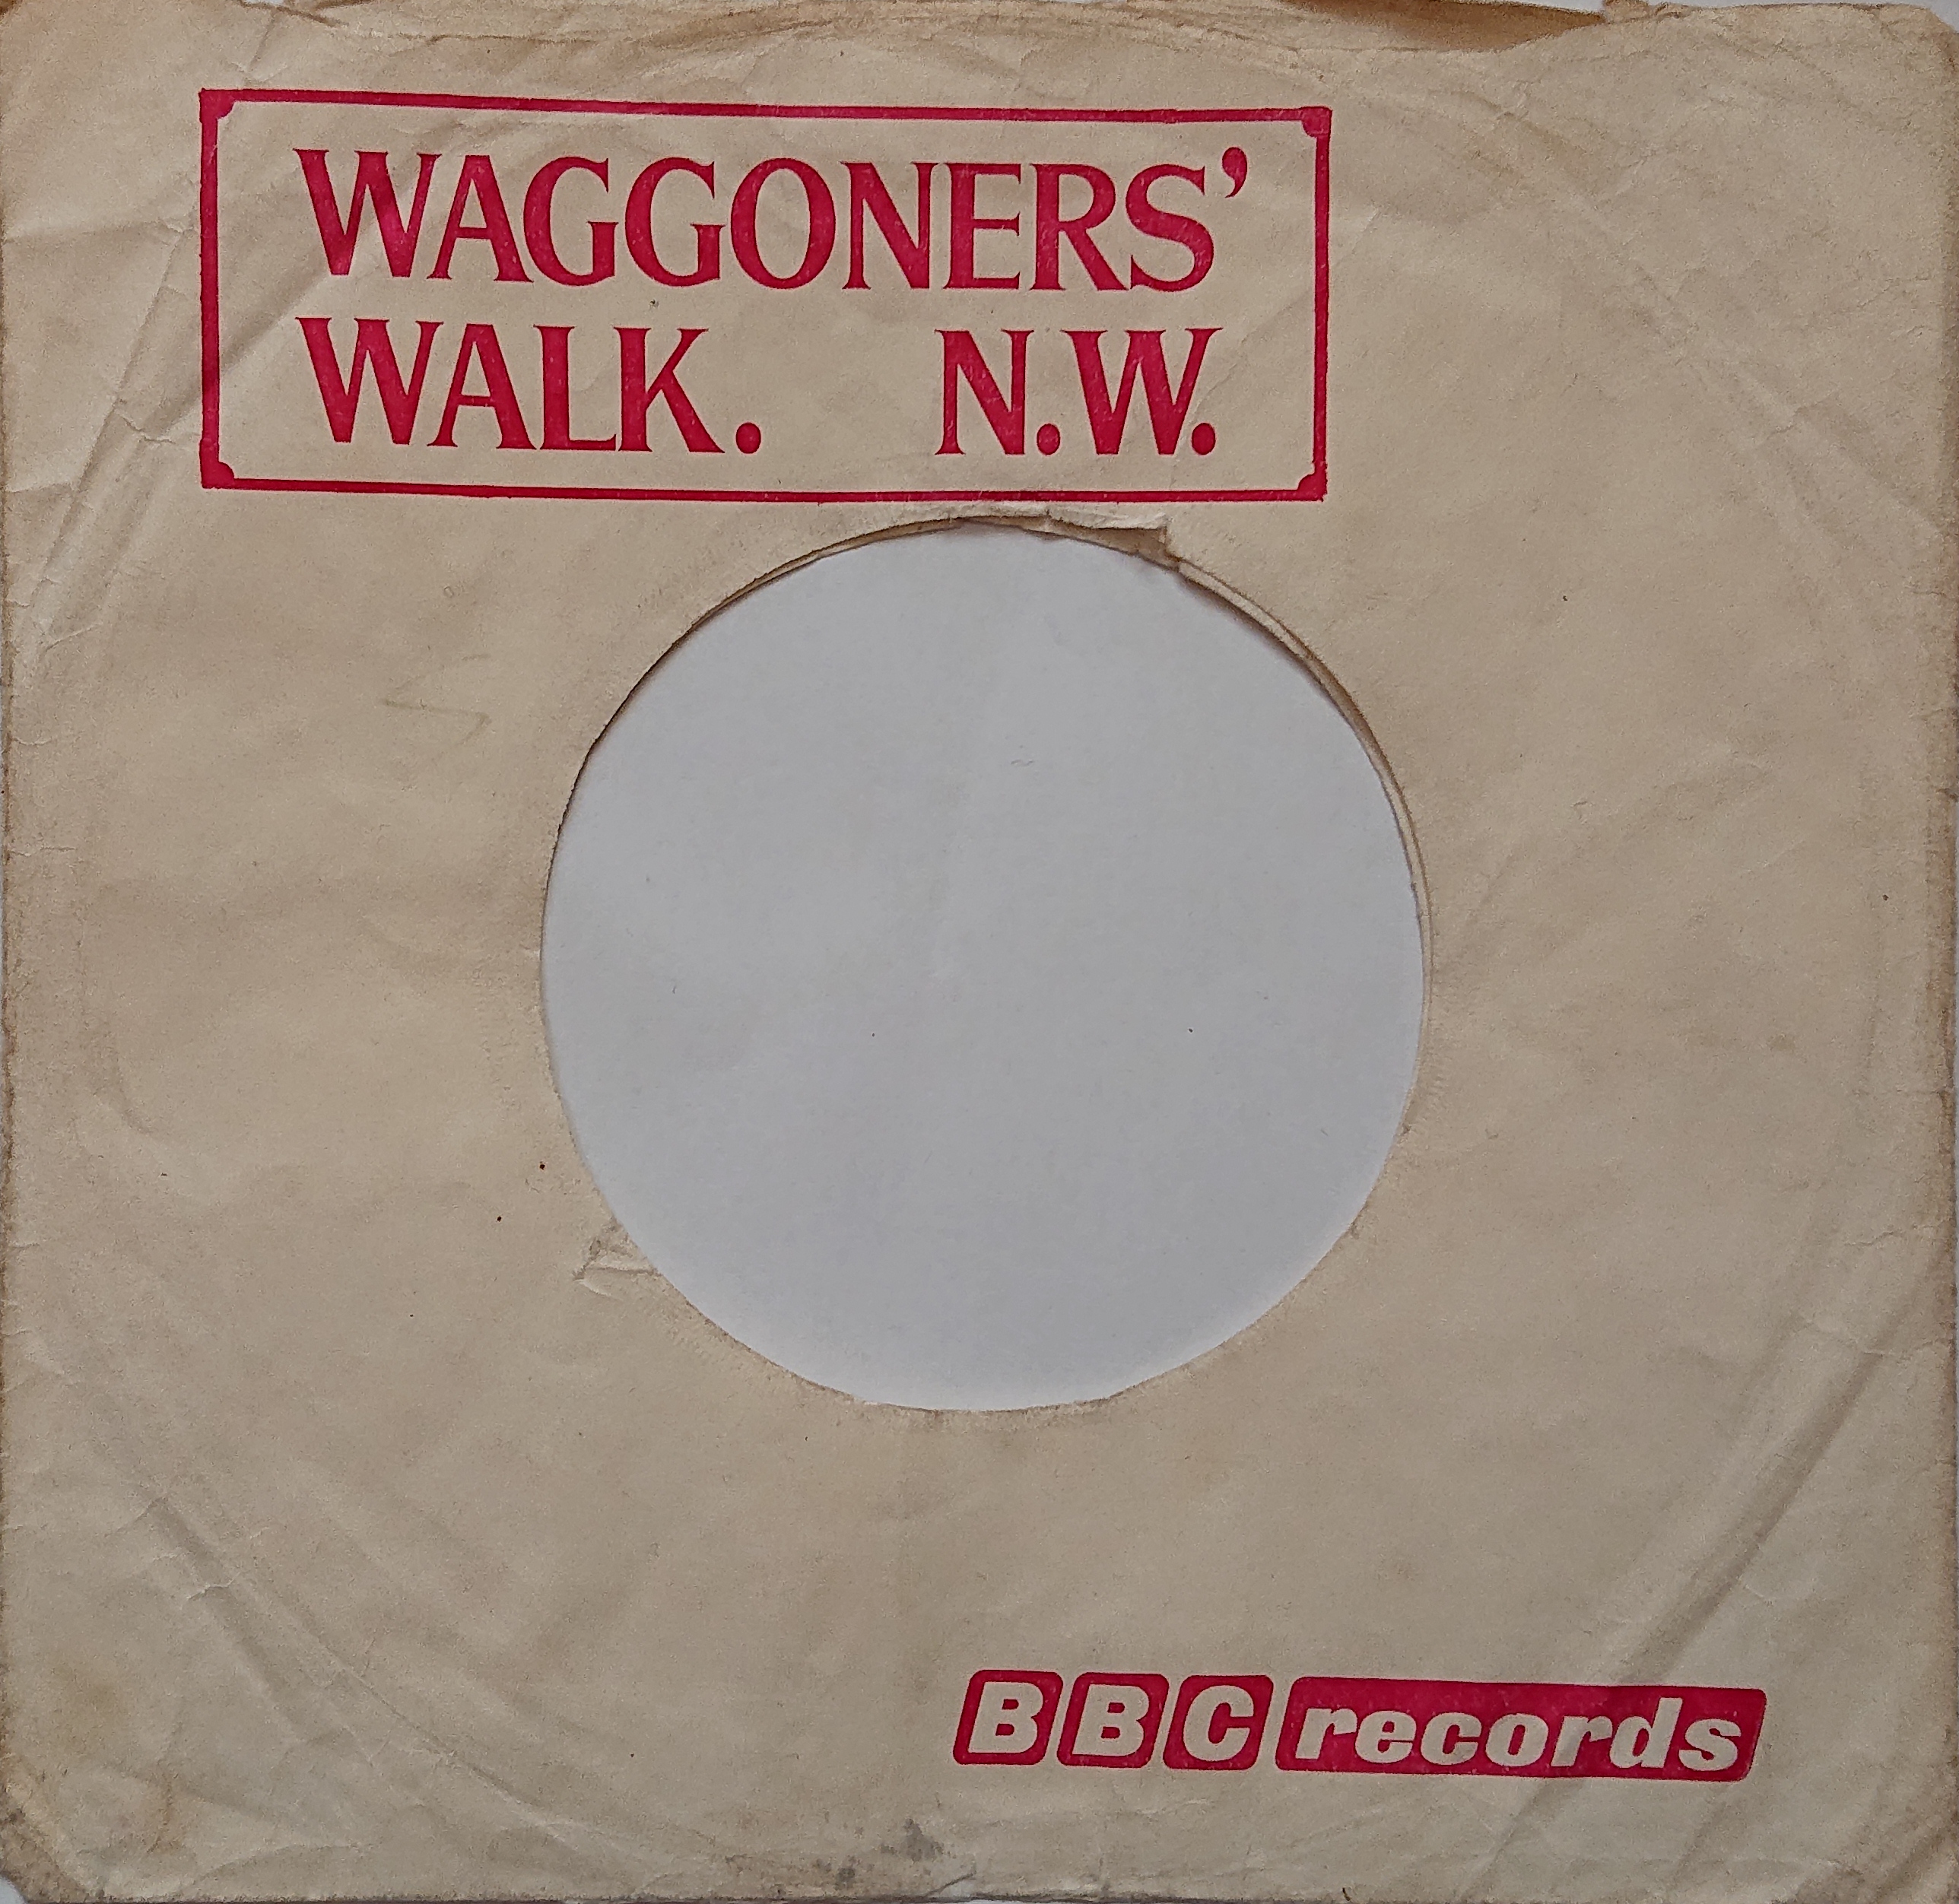 Picture of Waggoners' walk by artist Wade / Cliff / Trane from the BBC singles - Records and Tapes library